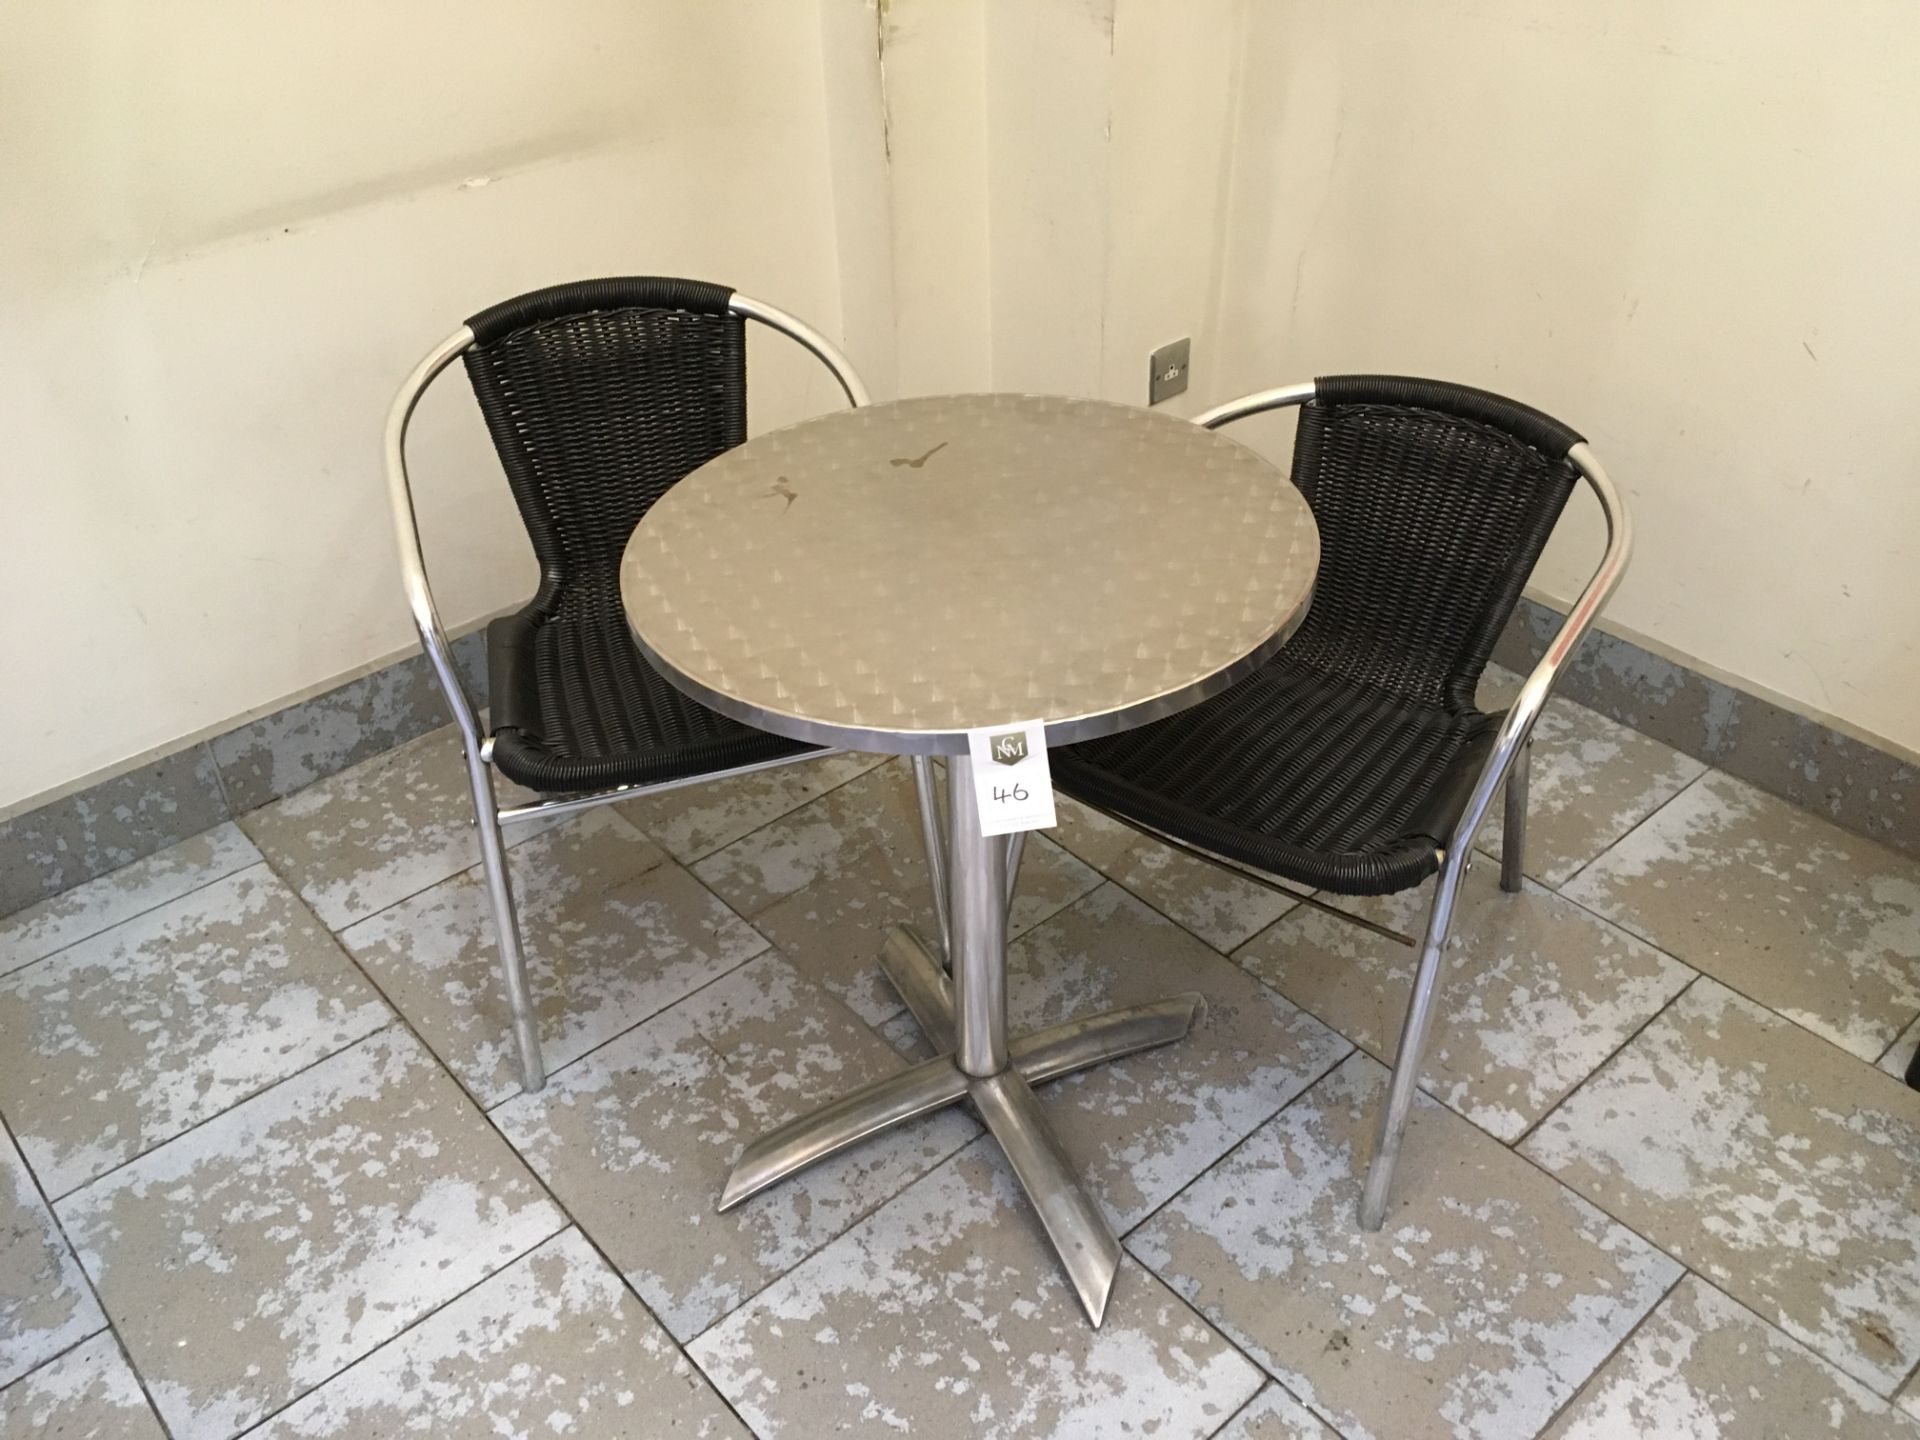 Chrome Frame Chairs x 2 and chrome bistro table